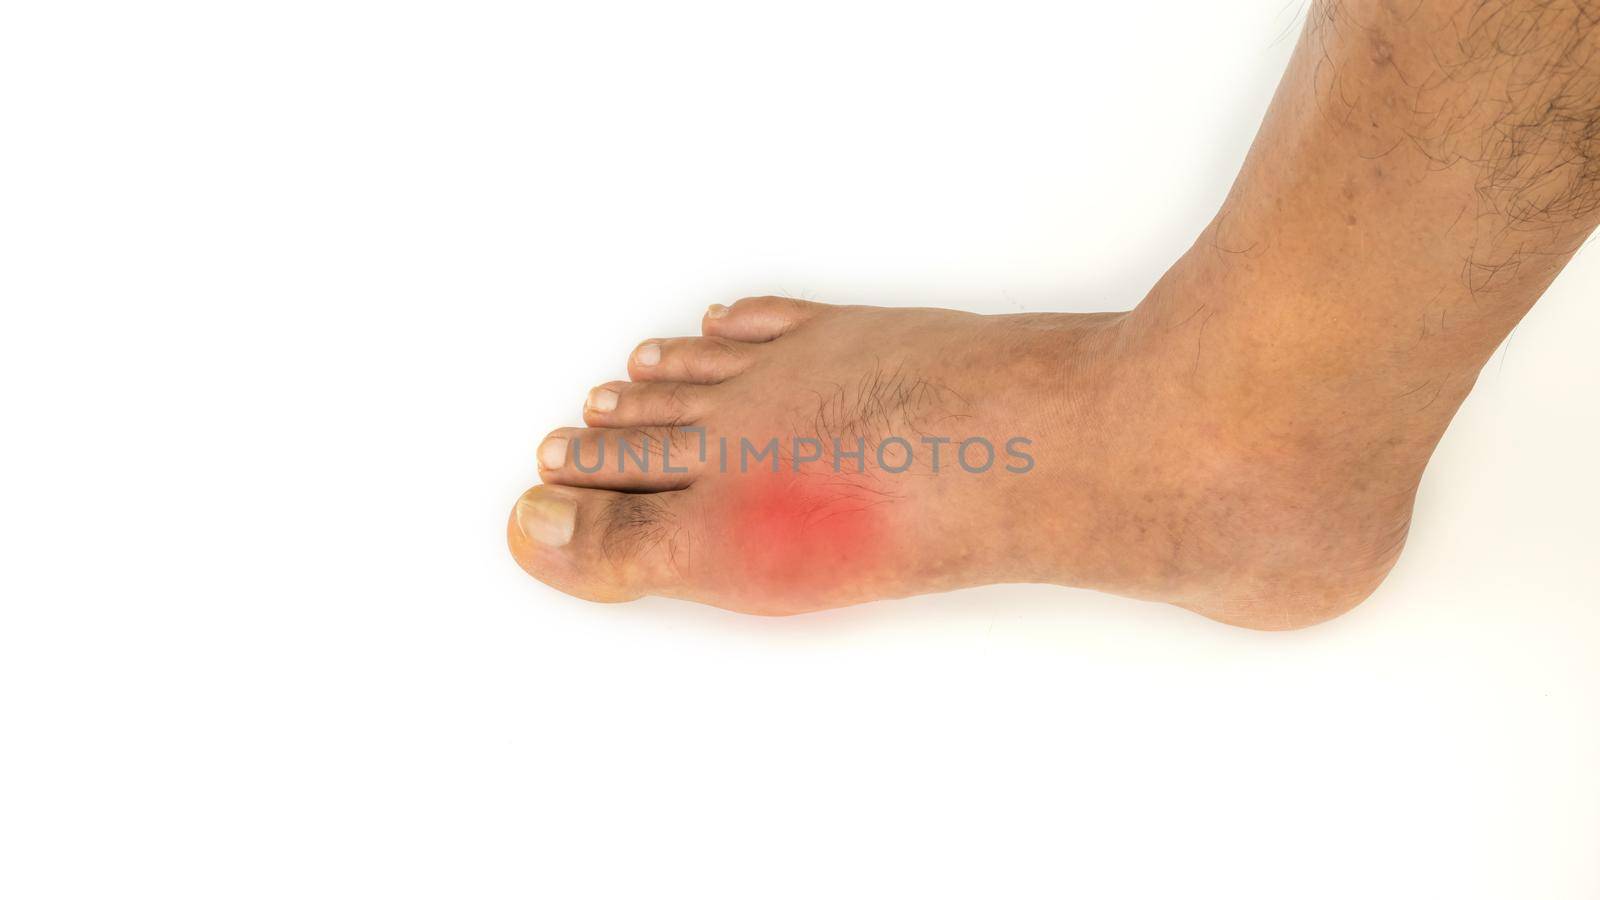 Foot disease Rheumatism and gout. by suththisumdeang